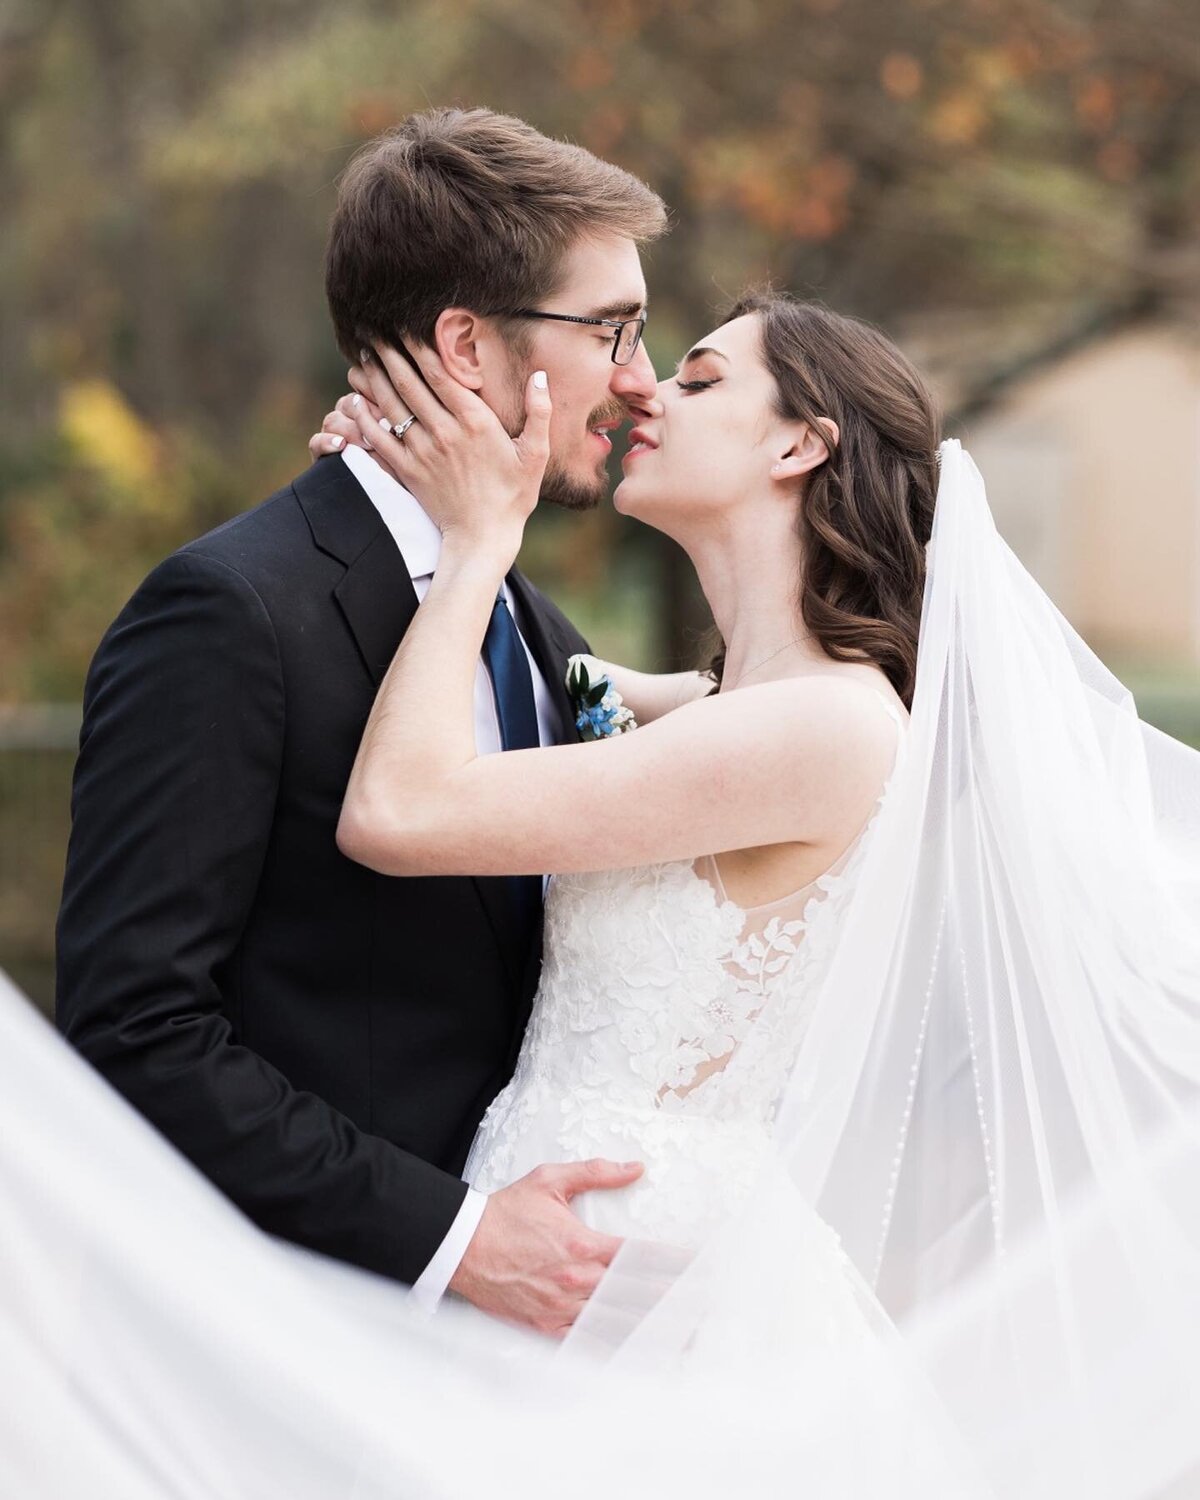 A bride and groom kiss surrounded by her veil